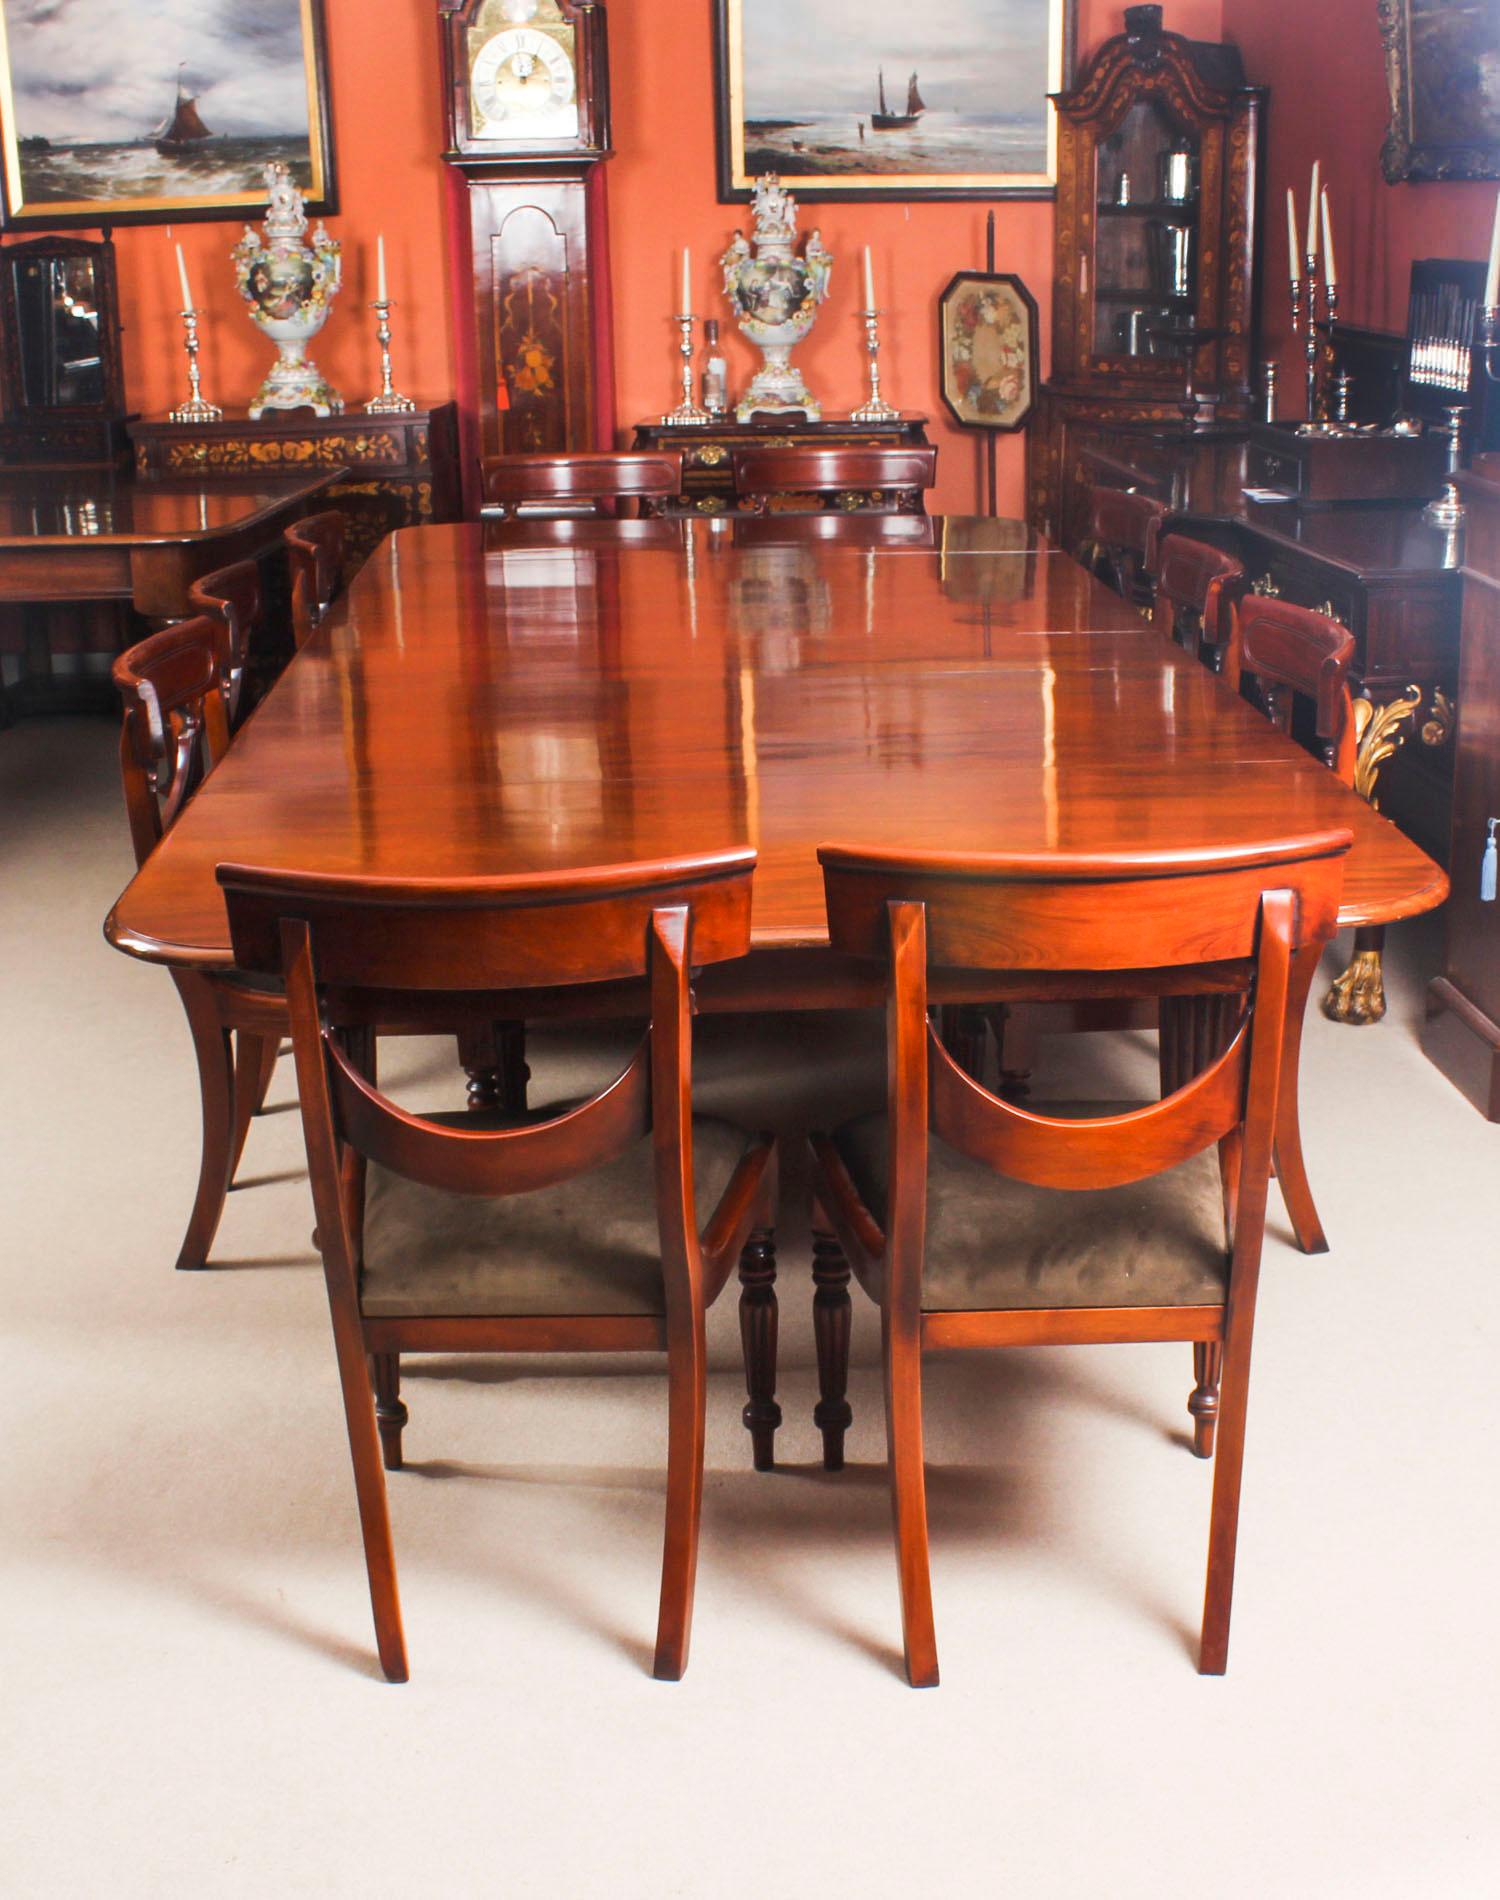 This is a fantastic dining set comprising an antique early Victorian flame mahogany extending dining table, circa 1840 in date, and a set of ten bespoke swag back dining chairs.

This amazing table can sit ten people in comfort and at a stretch up